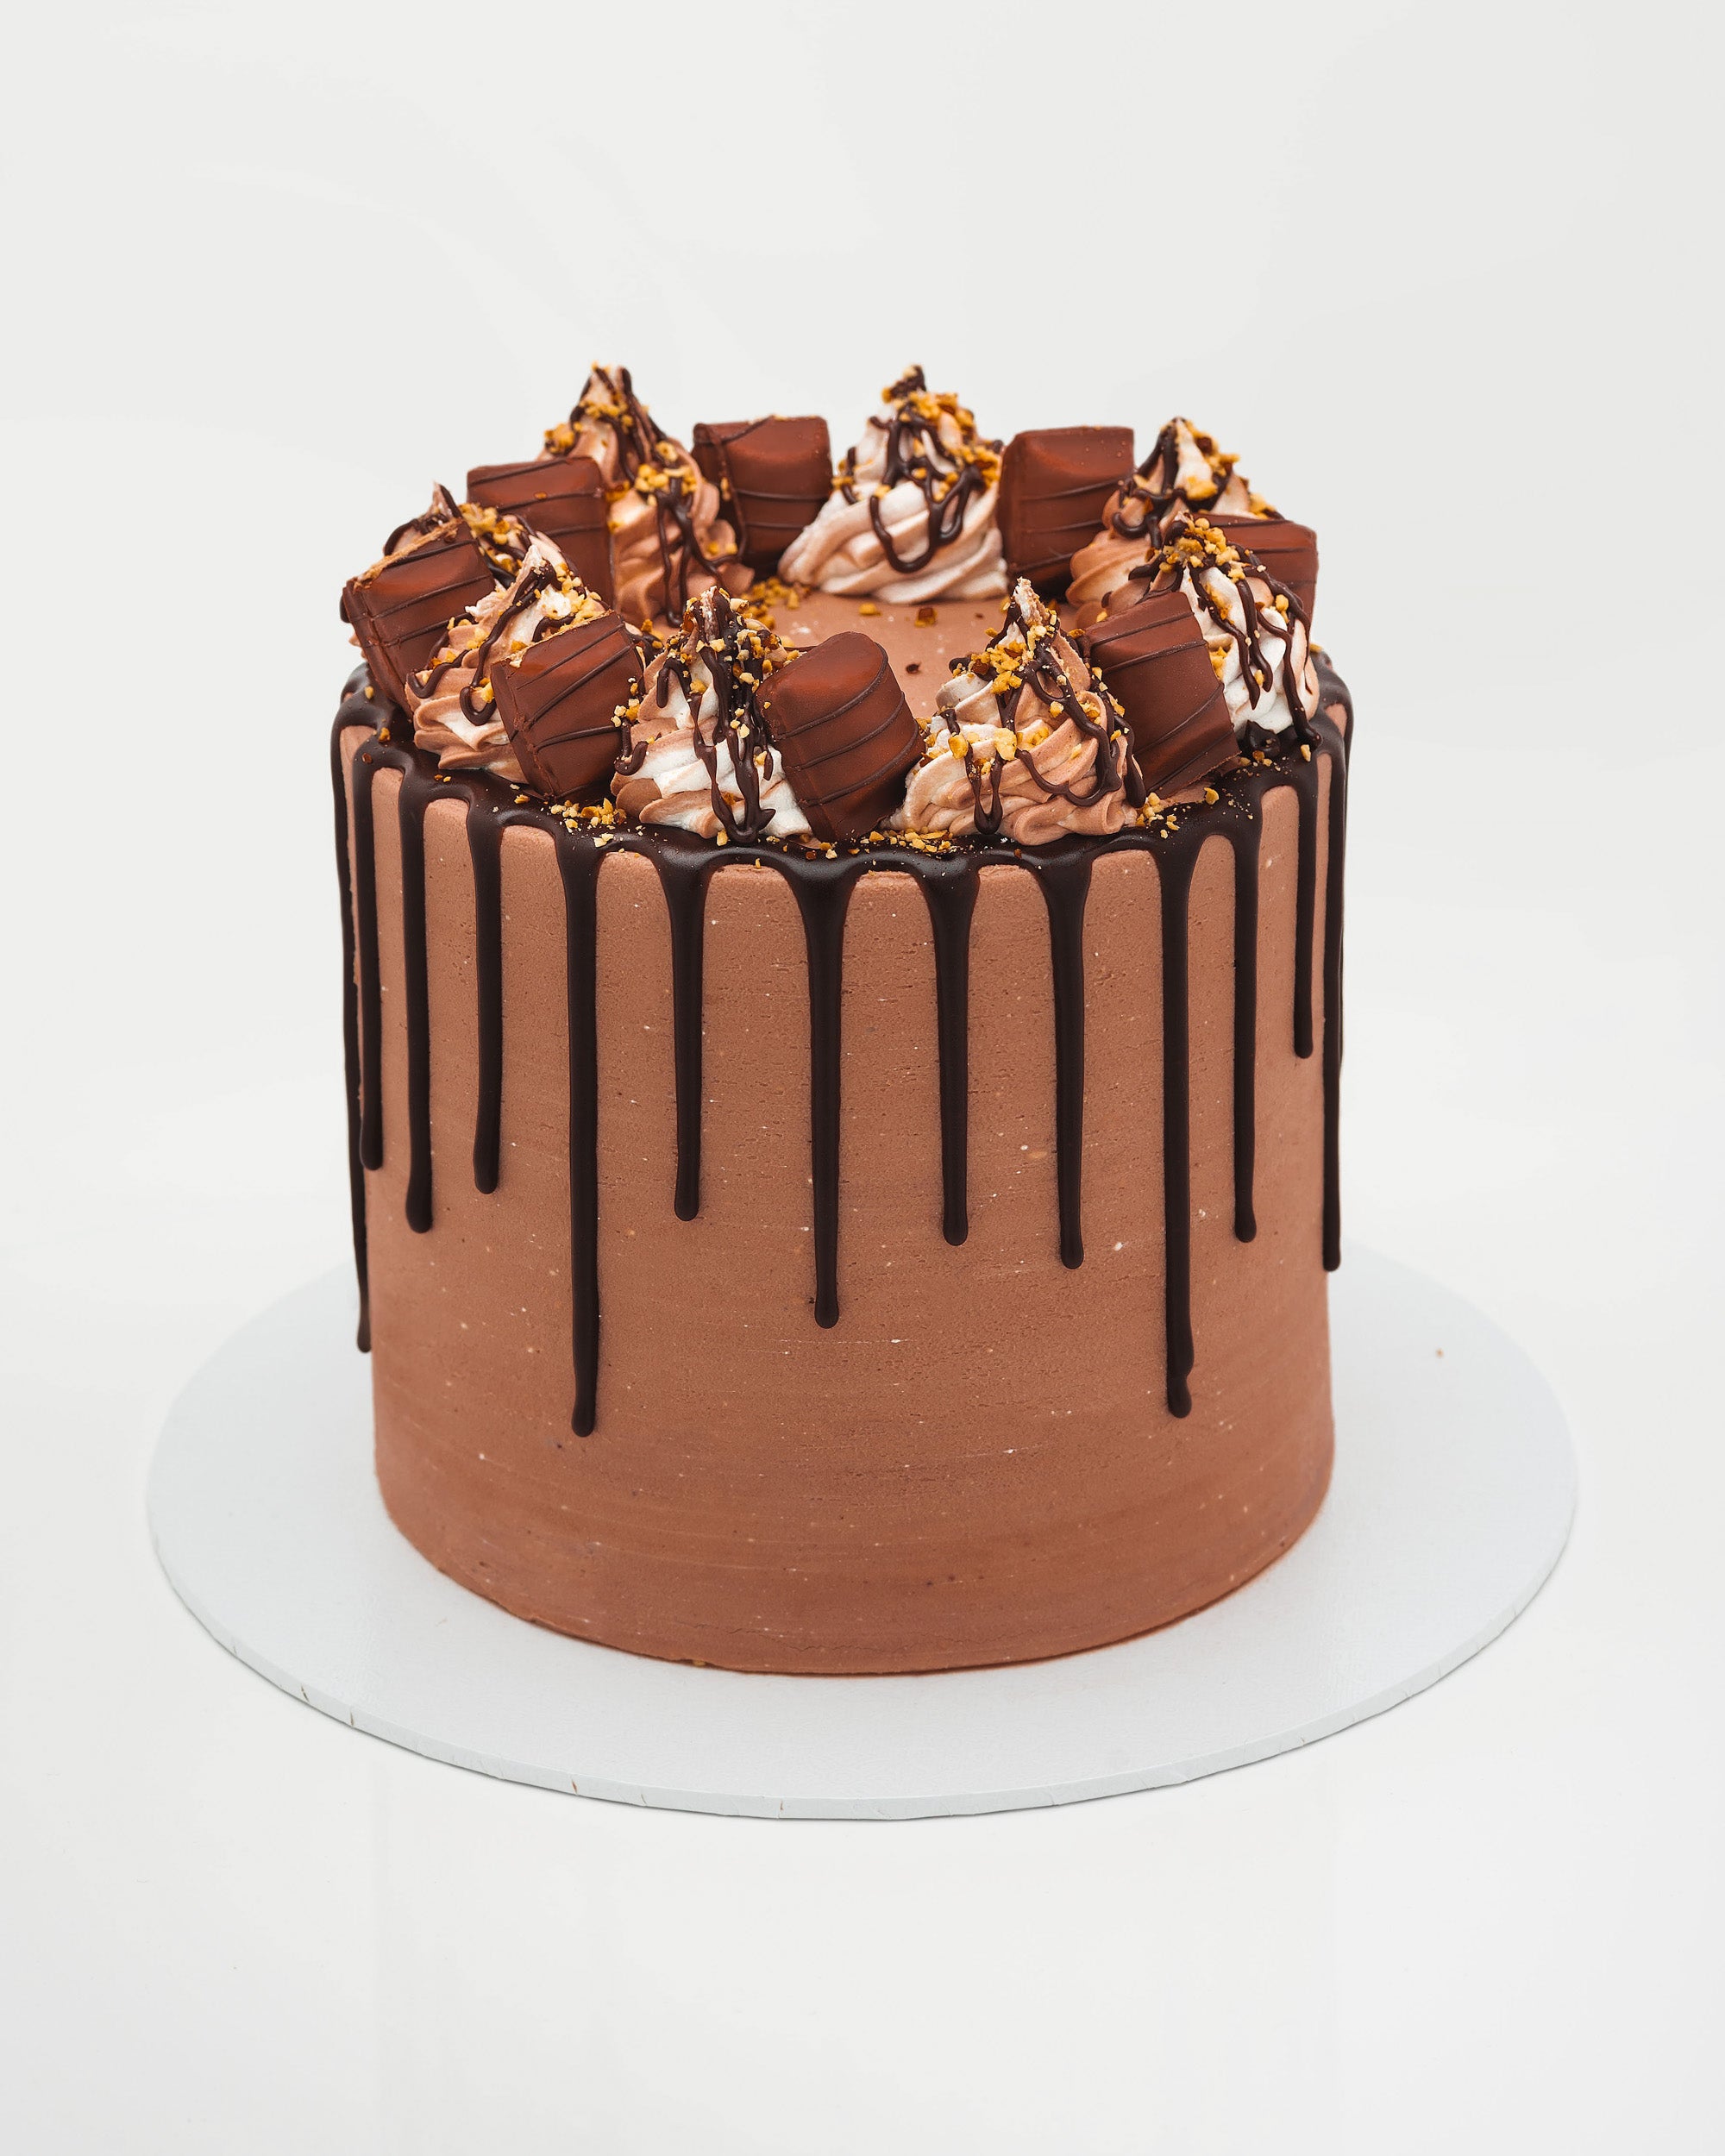 A-C11) Deluxe Chocolate Fudge Cake – The ROYALS Cafe